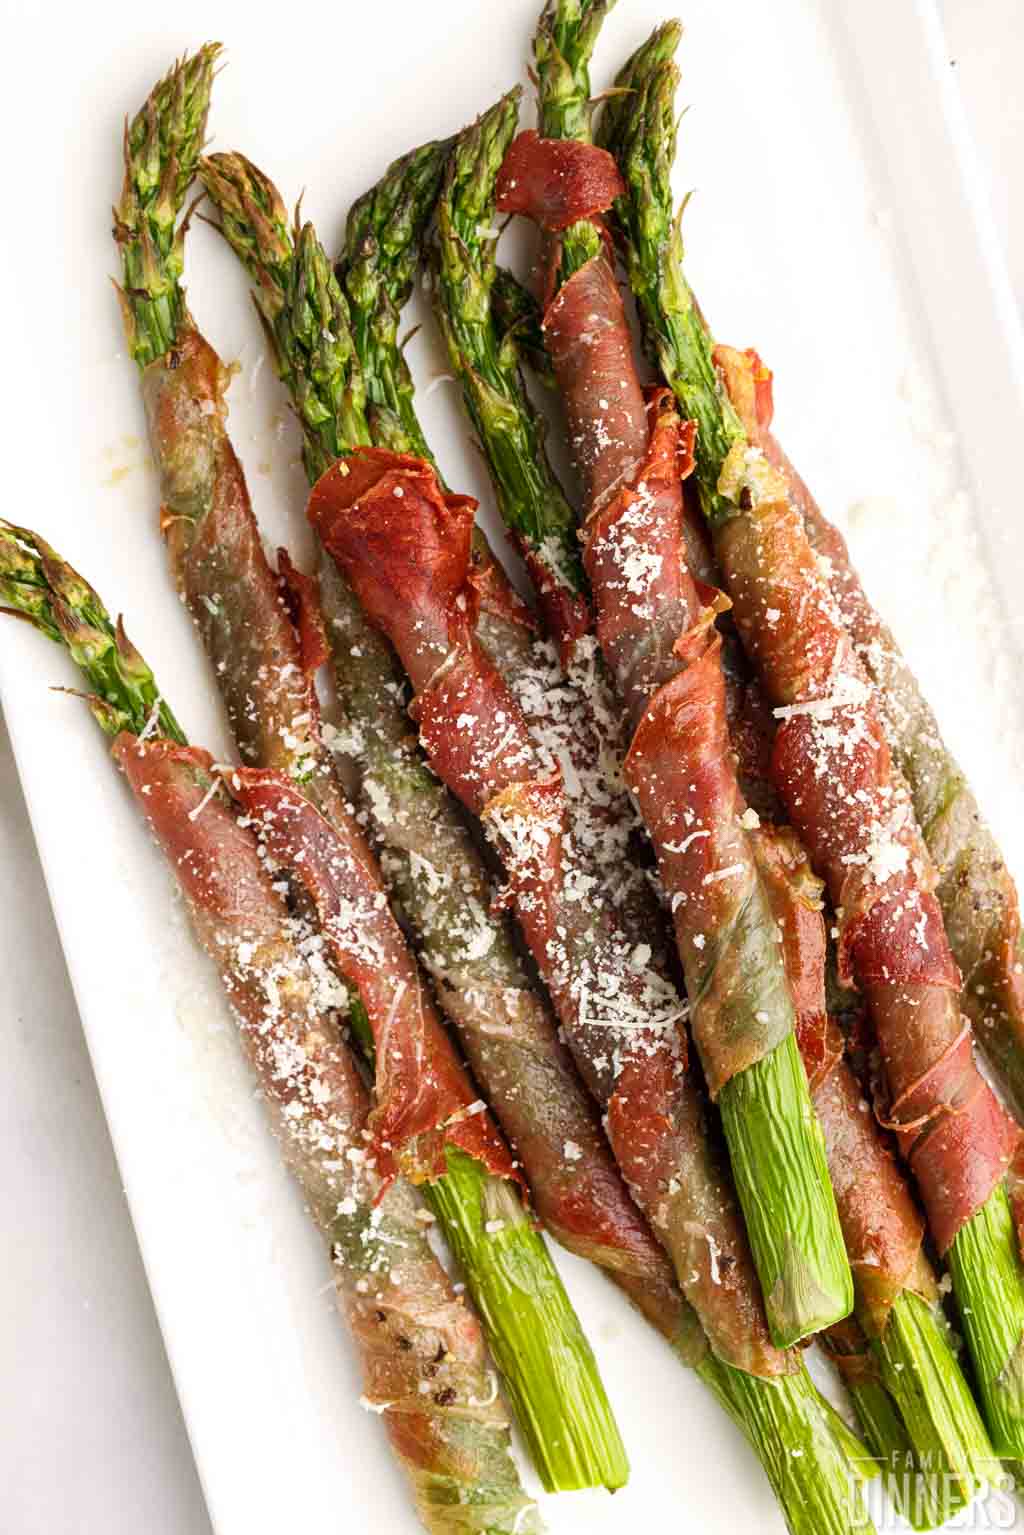 Cooked asparagus wrapped in prosciutto.